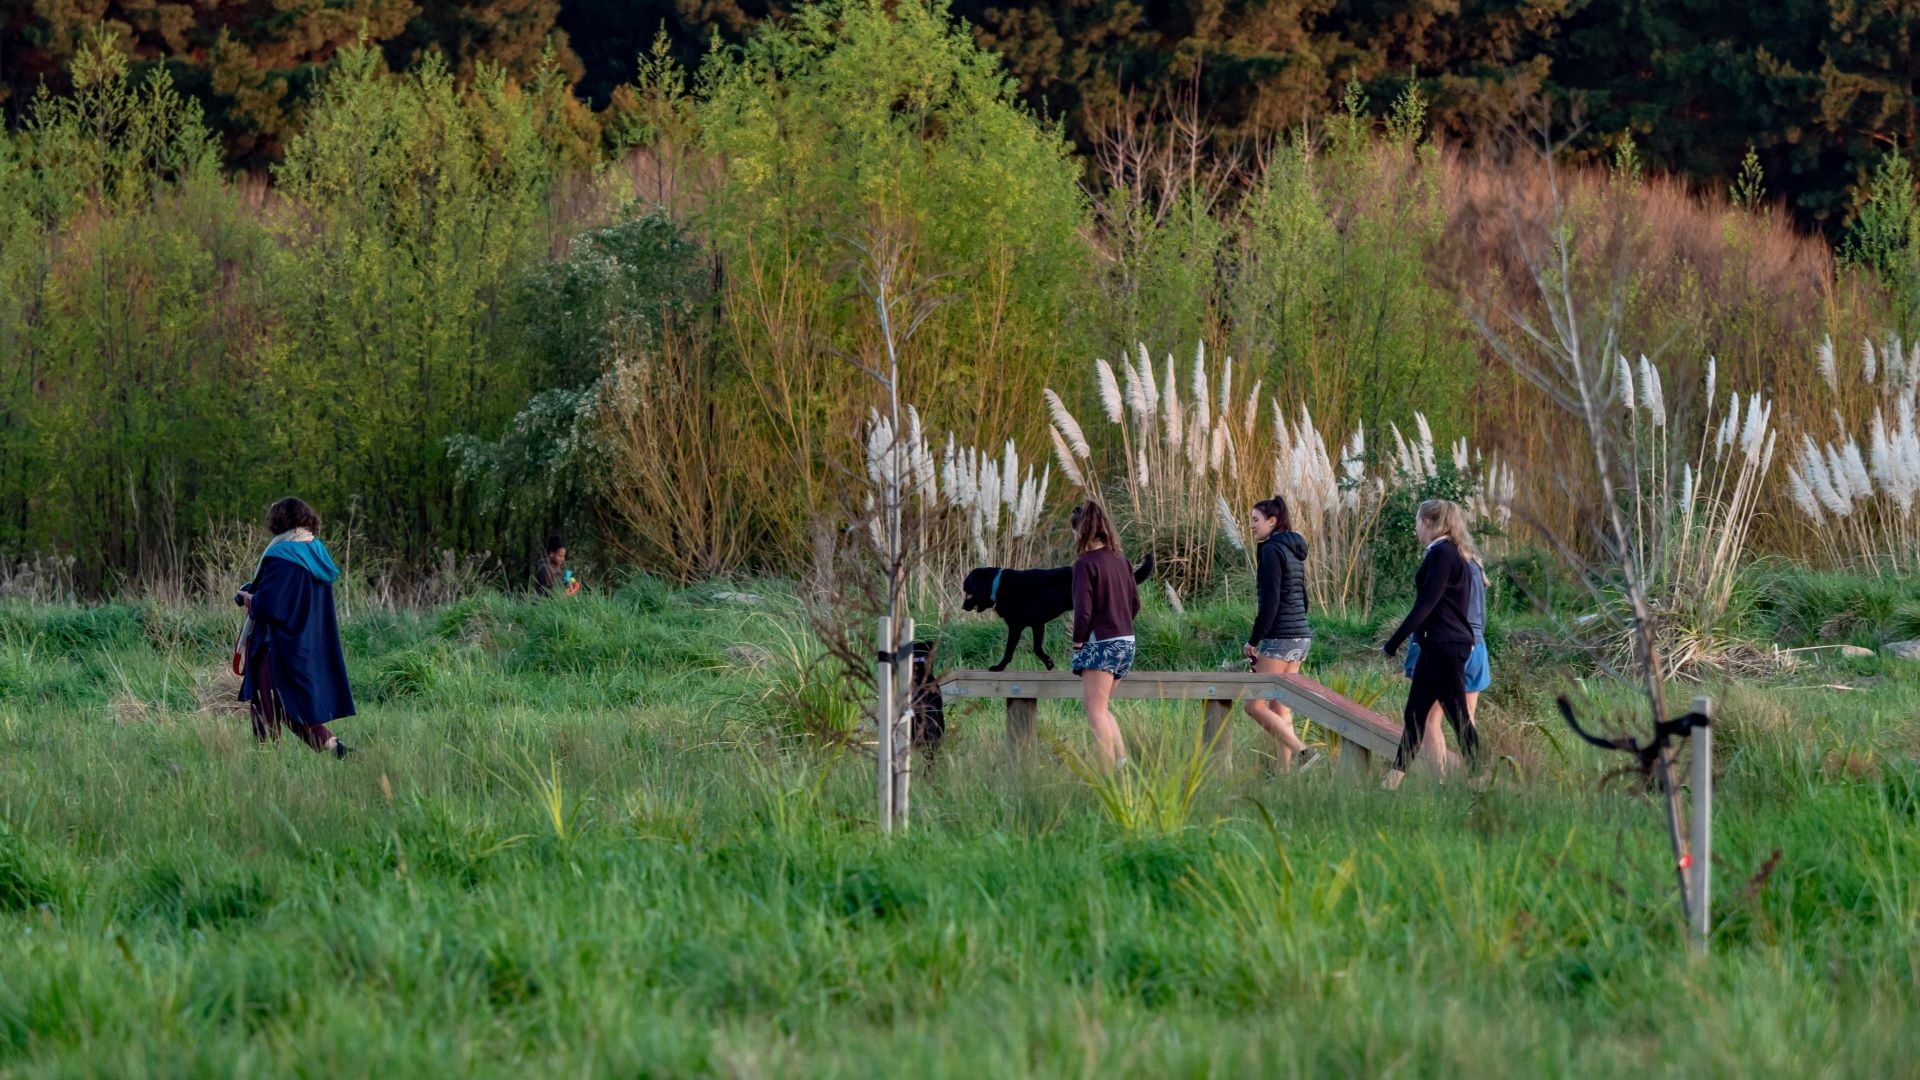 Photo shows two women and three teenagers walking a dog through long grass with trees in the background.